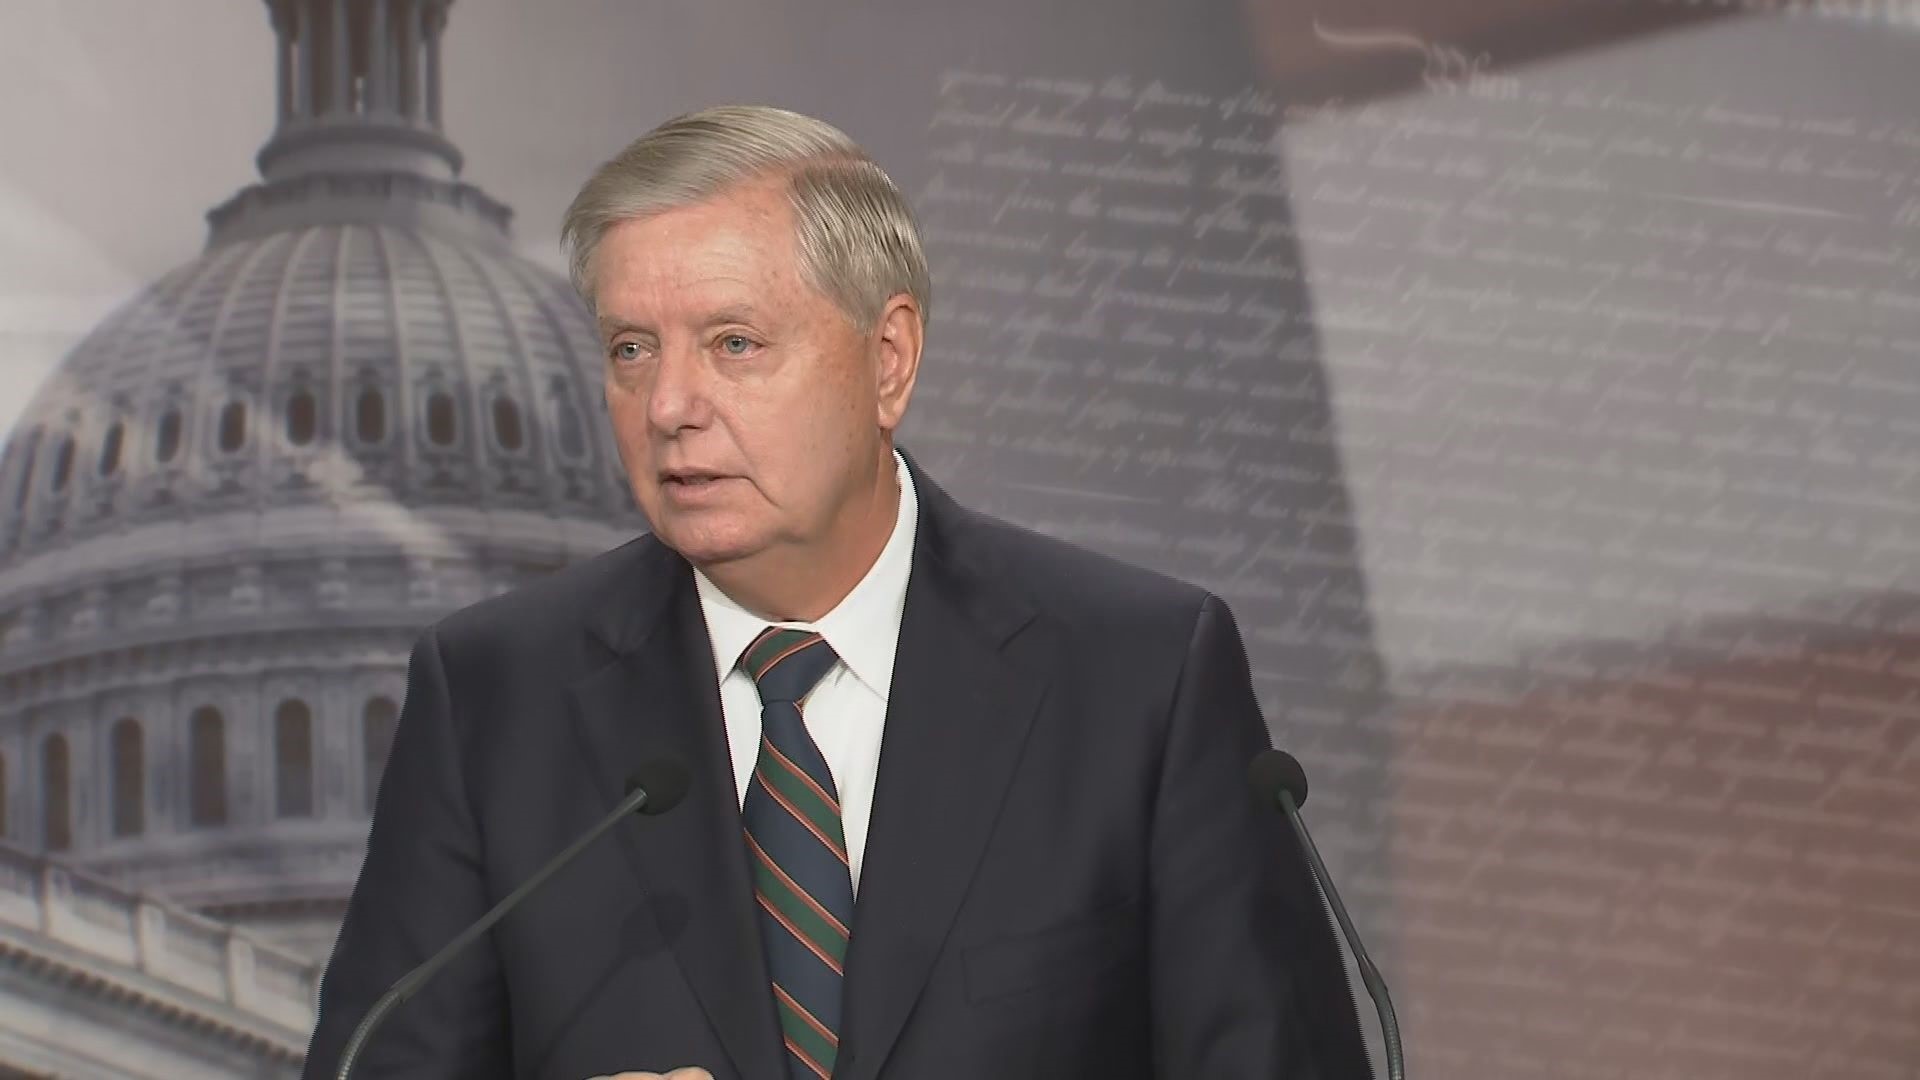 Lindsey Graham said Thursday that Donald Trump 'needs to understand that his actions were the problem, not the solution.'